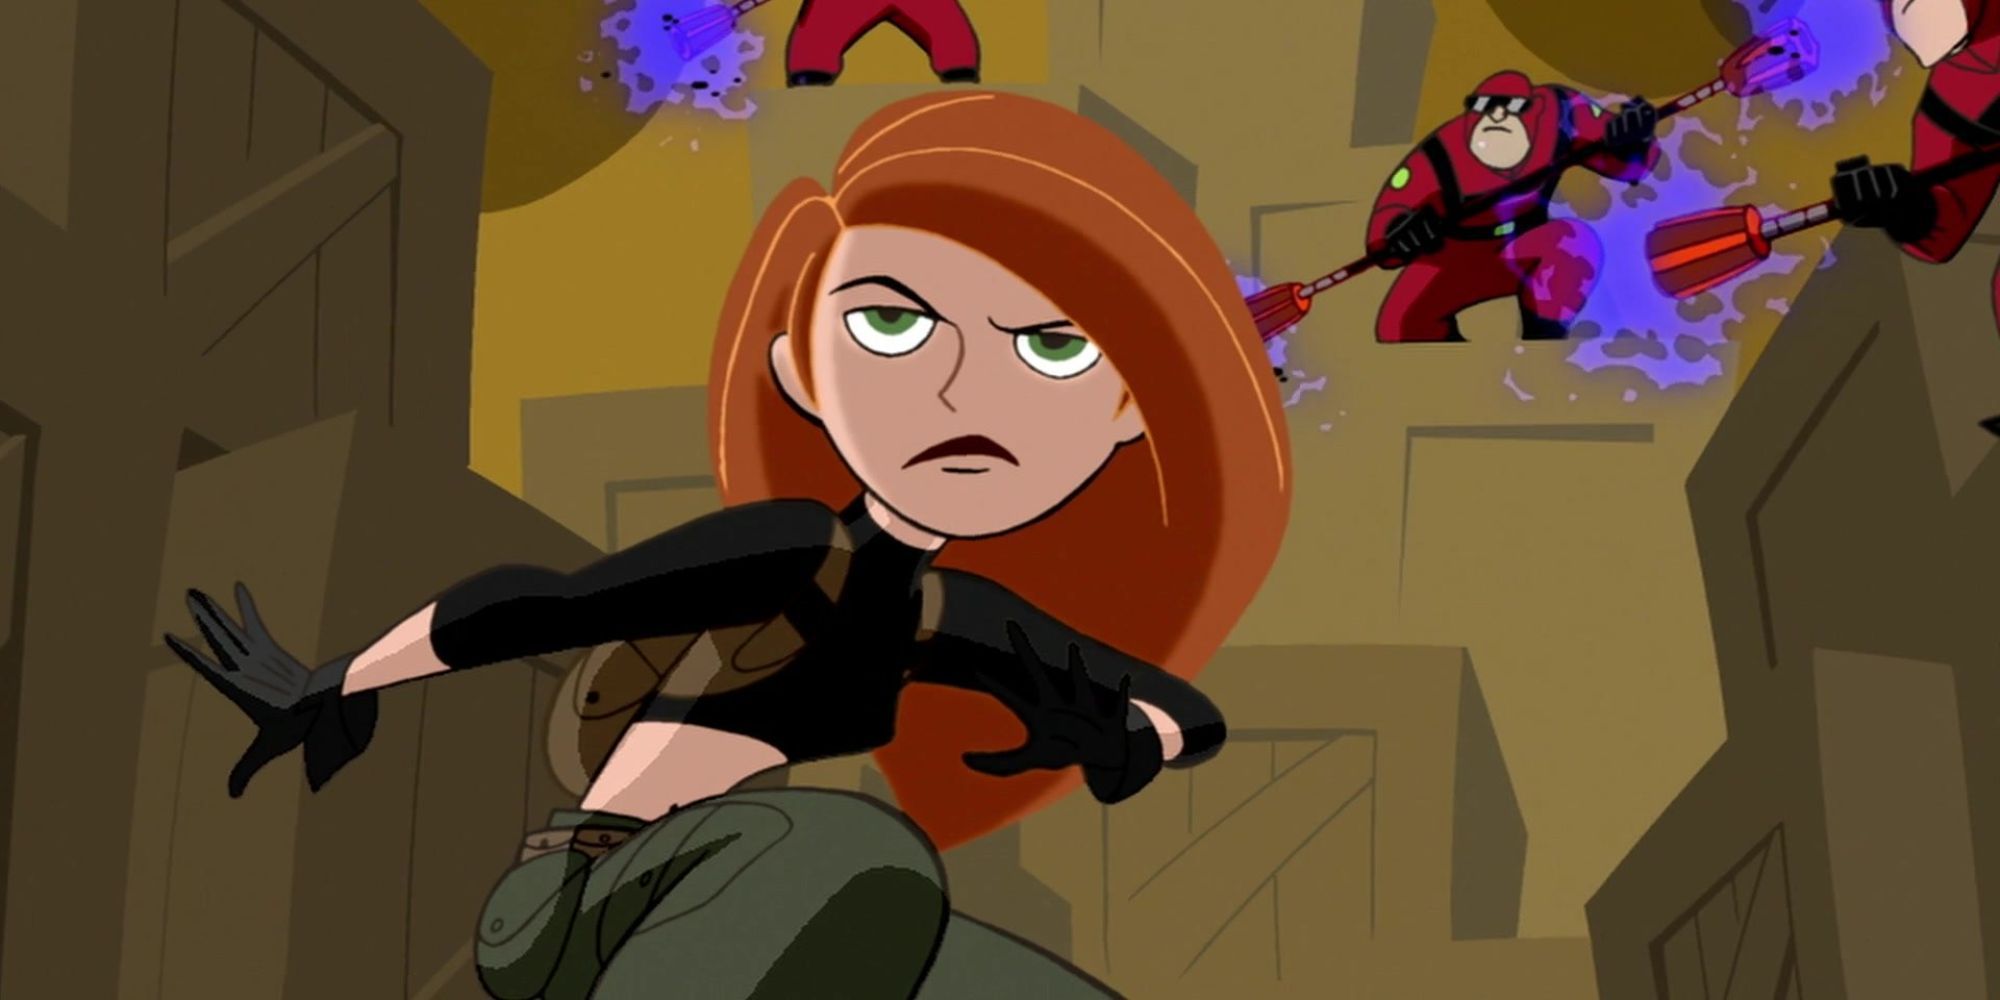 A screengrab of Kim Possible from the show of the same name.